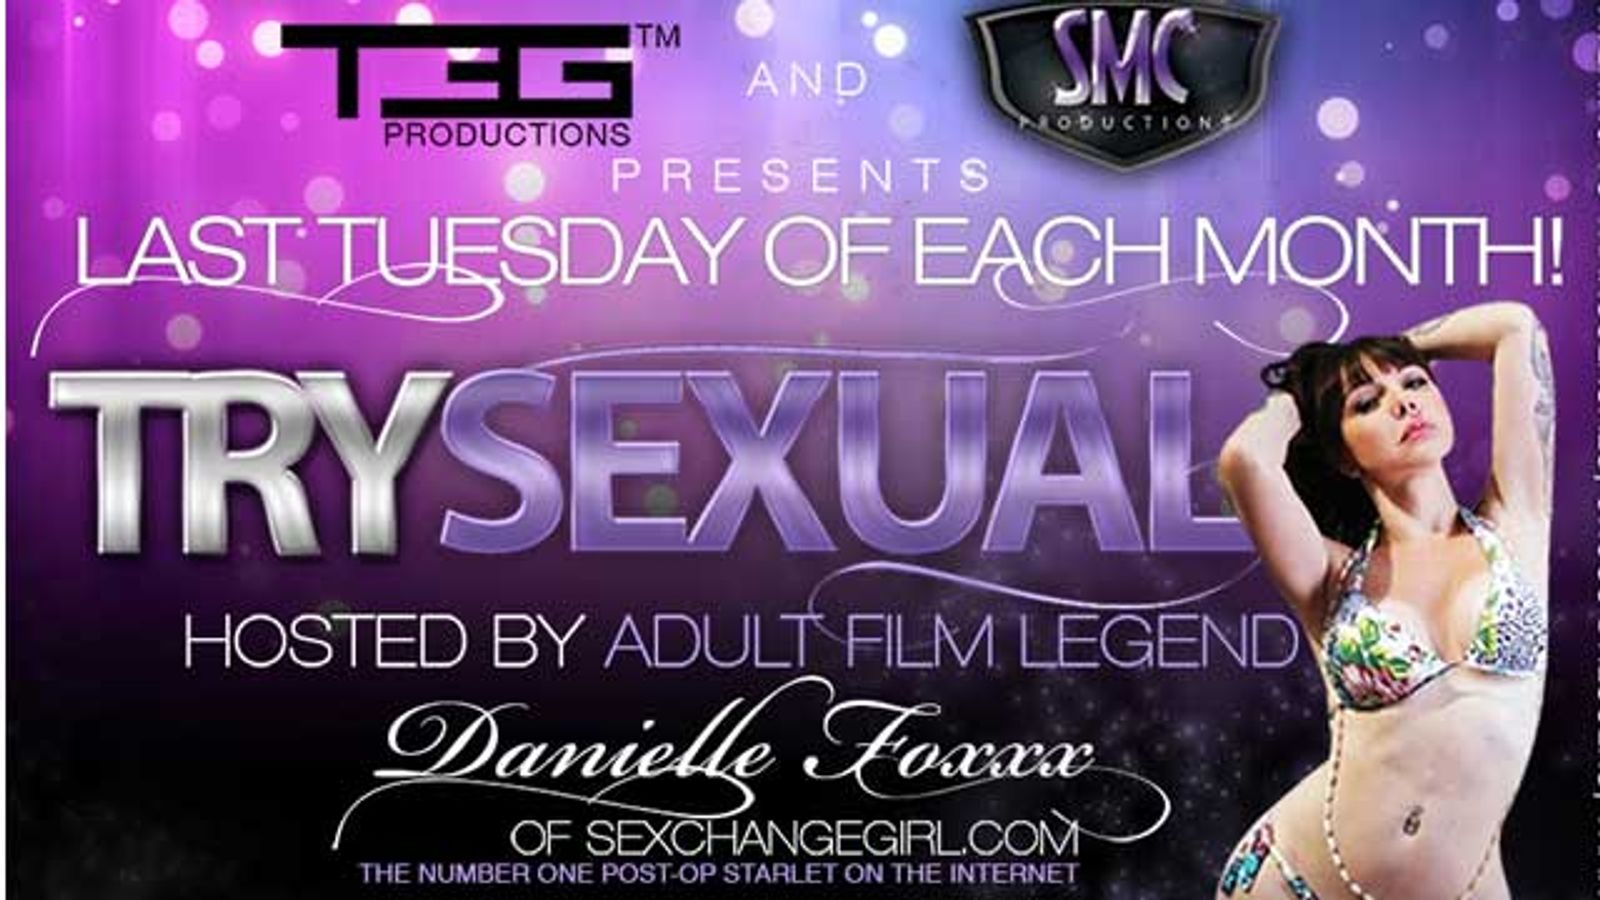 Danielle Foxx to Host TS Event in Orlando on July 31